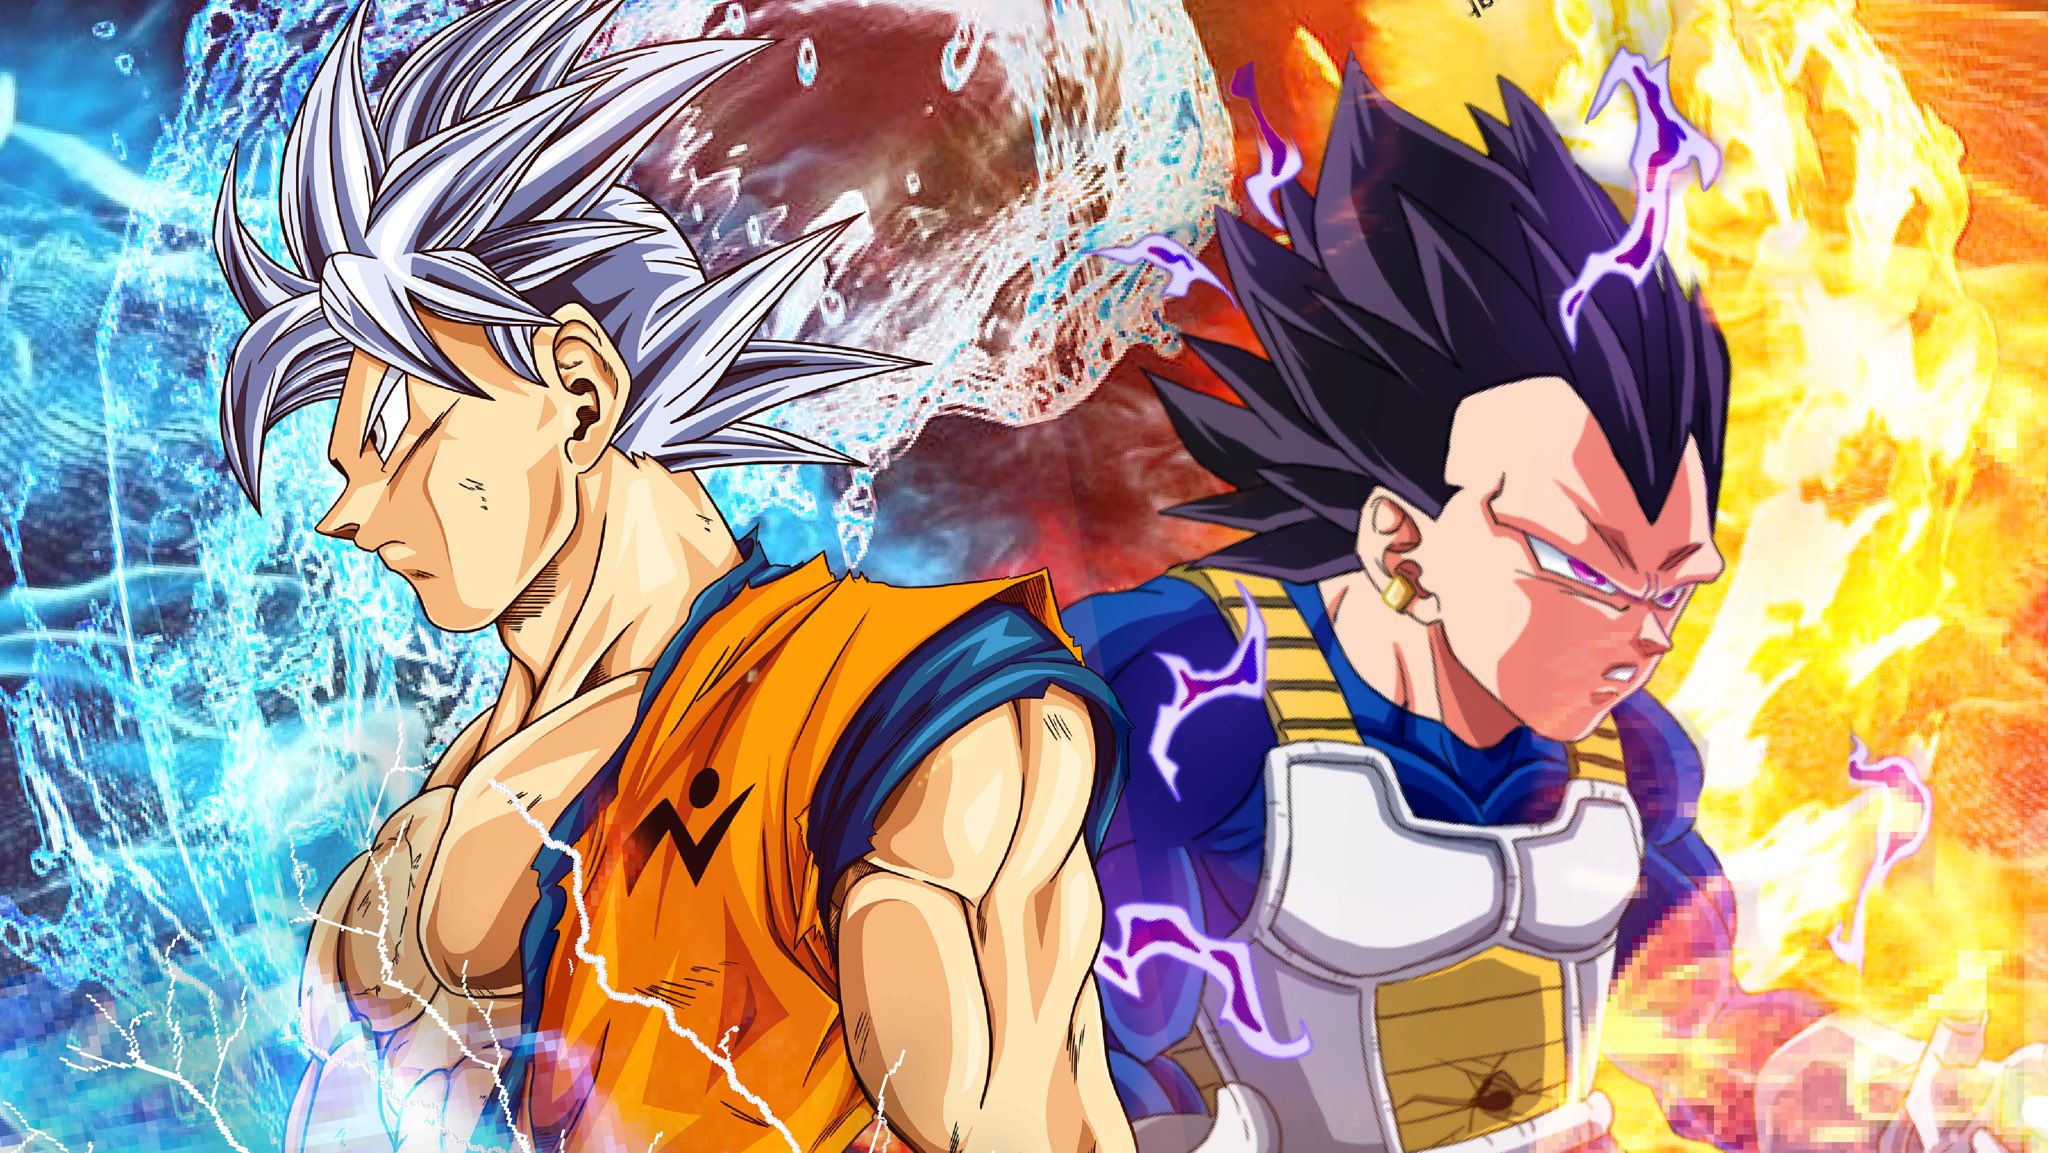 Geekdom101 Instinct vs. Ultra Ego is truly a clash of pathways between two lifetime warriors, the Yin and Yang of #DragonBallSuper. On this video, we discuss the ROOTS of